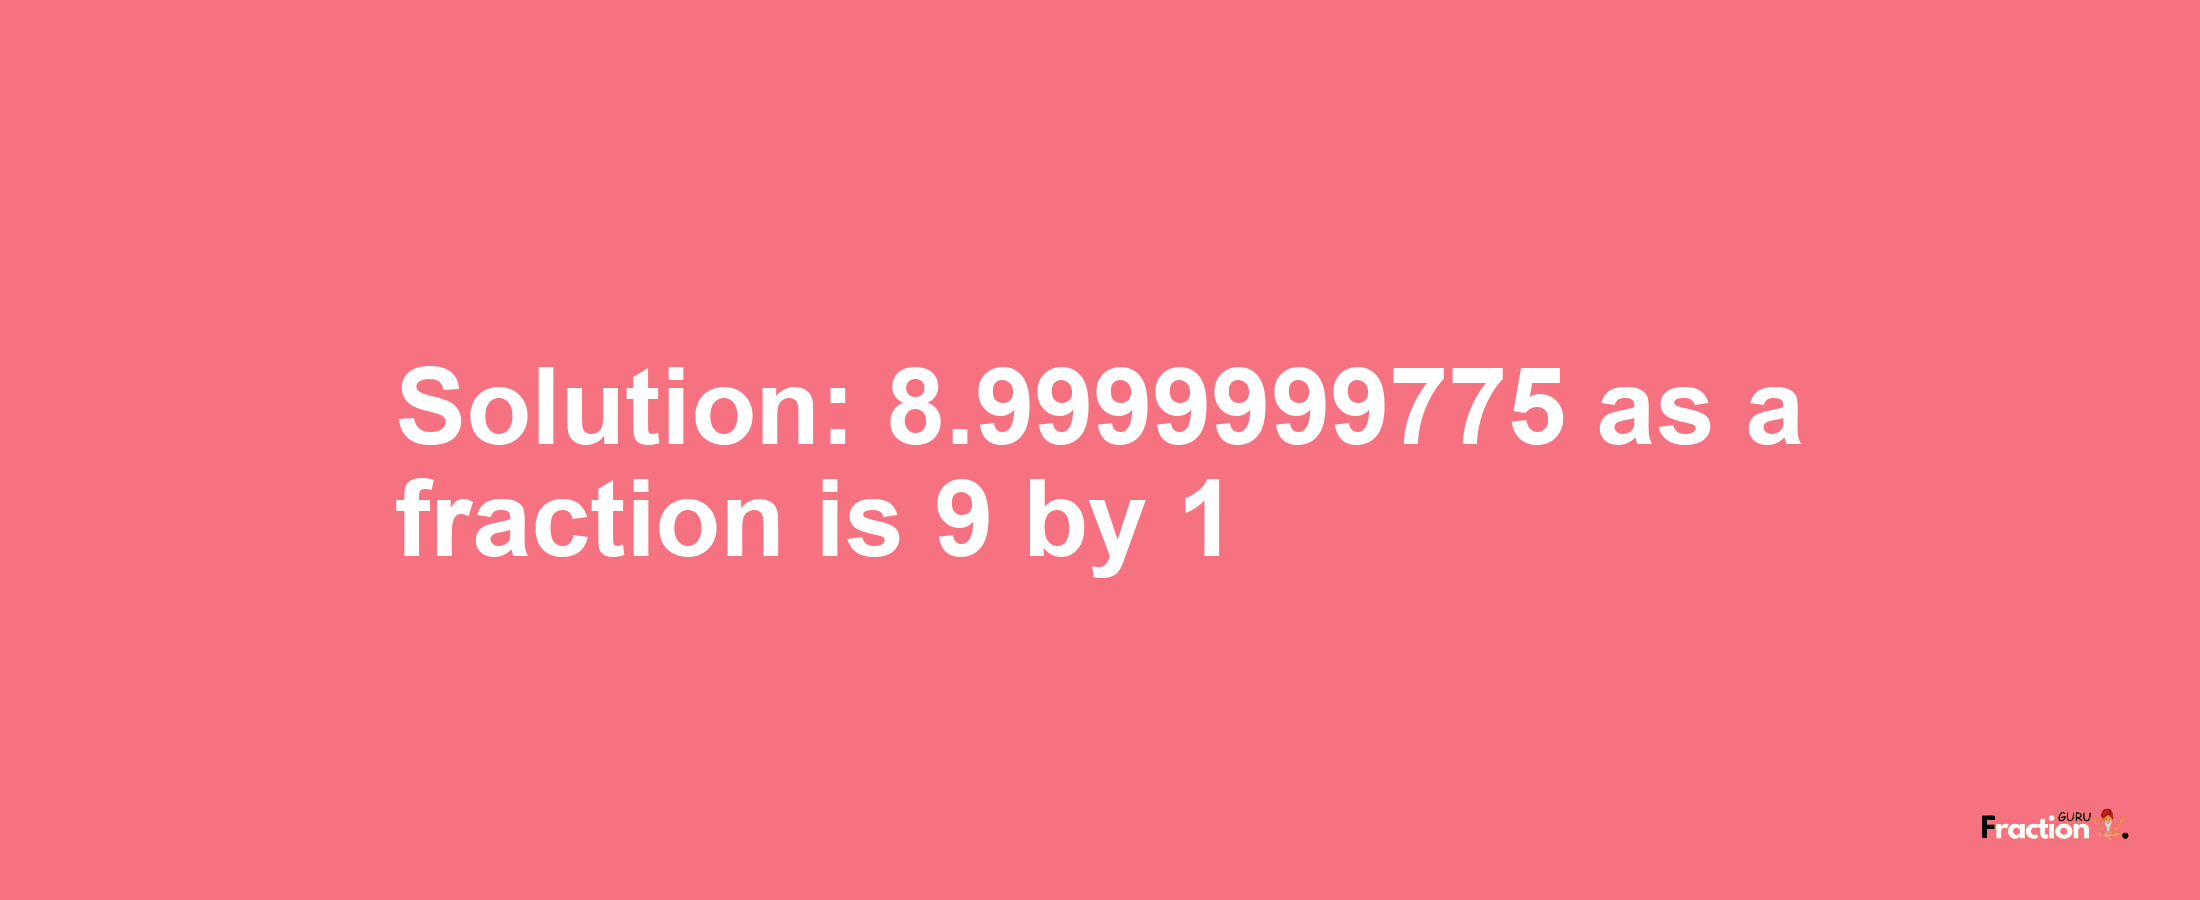 Solution:8.9999999775 as a fraction is 9/1